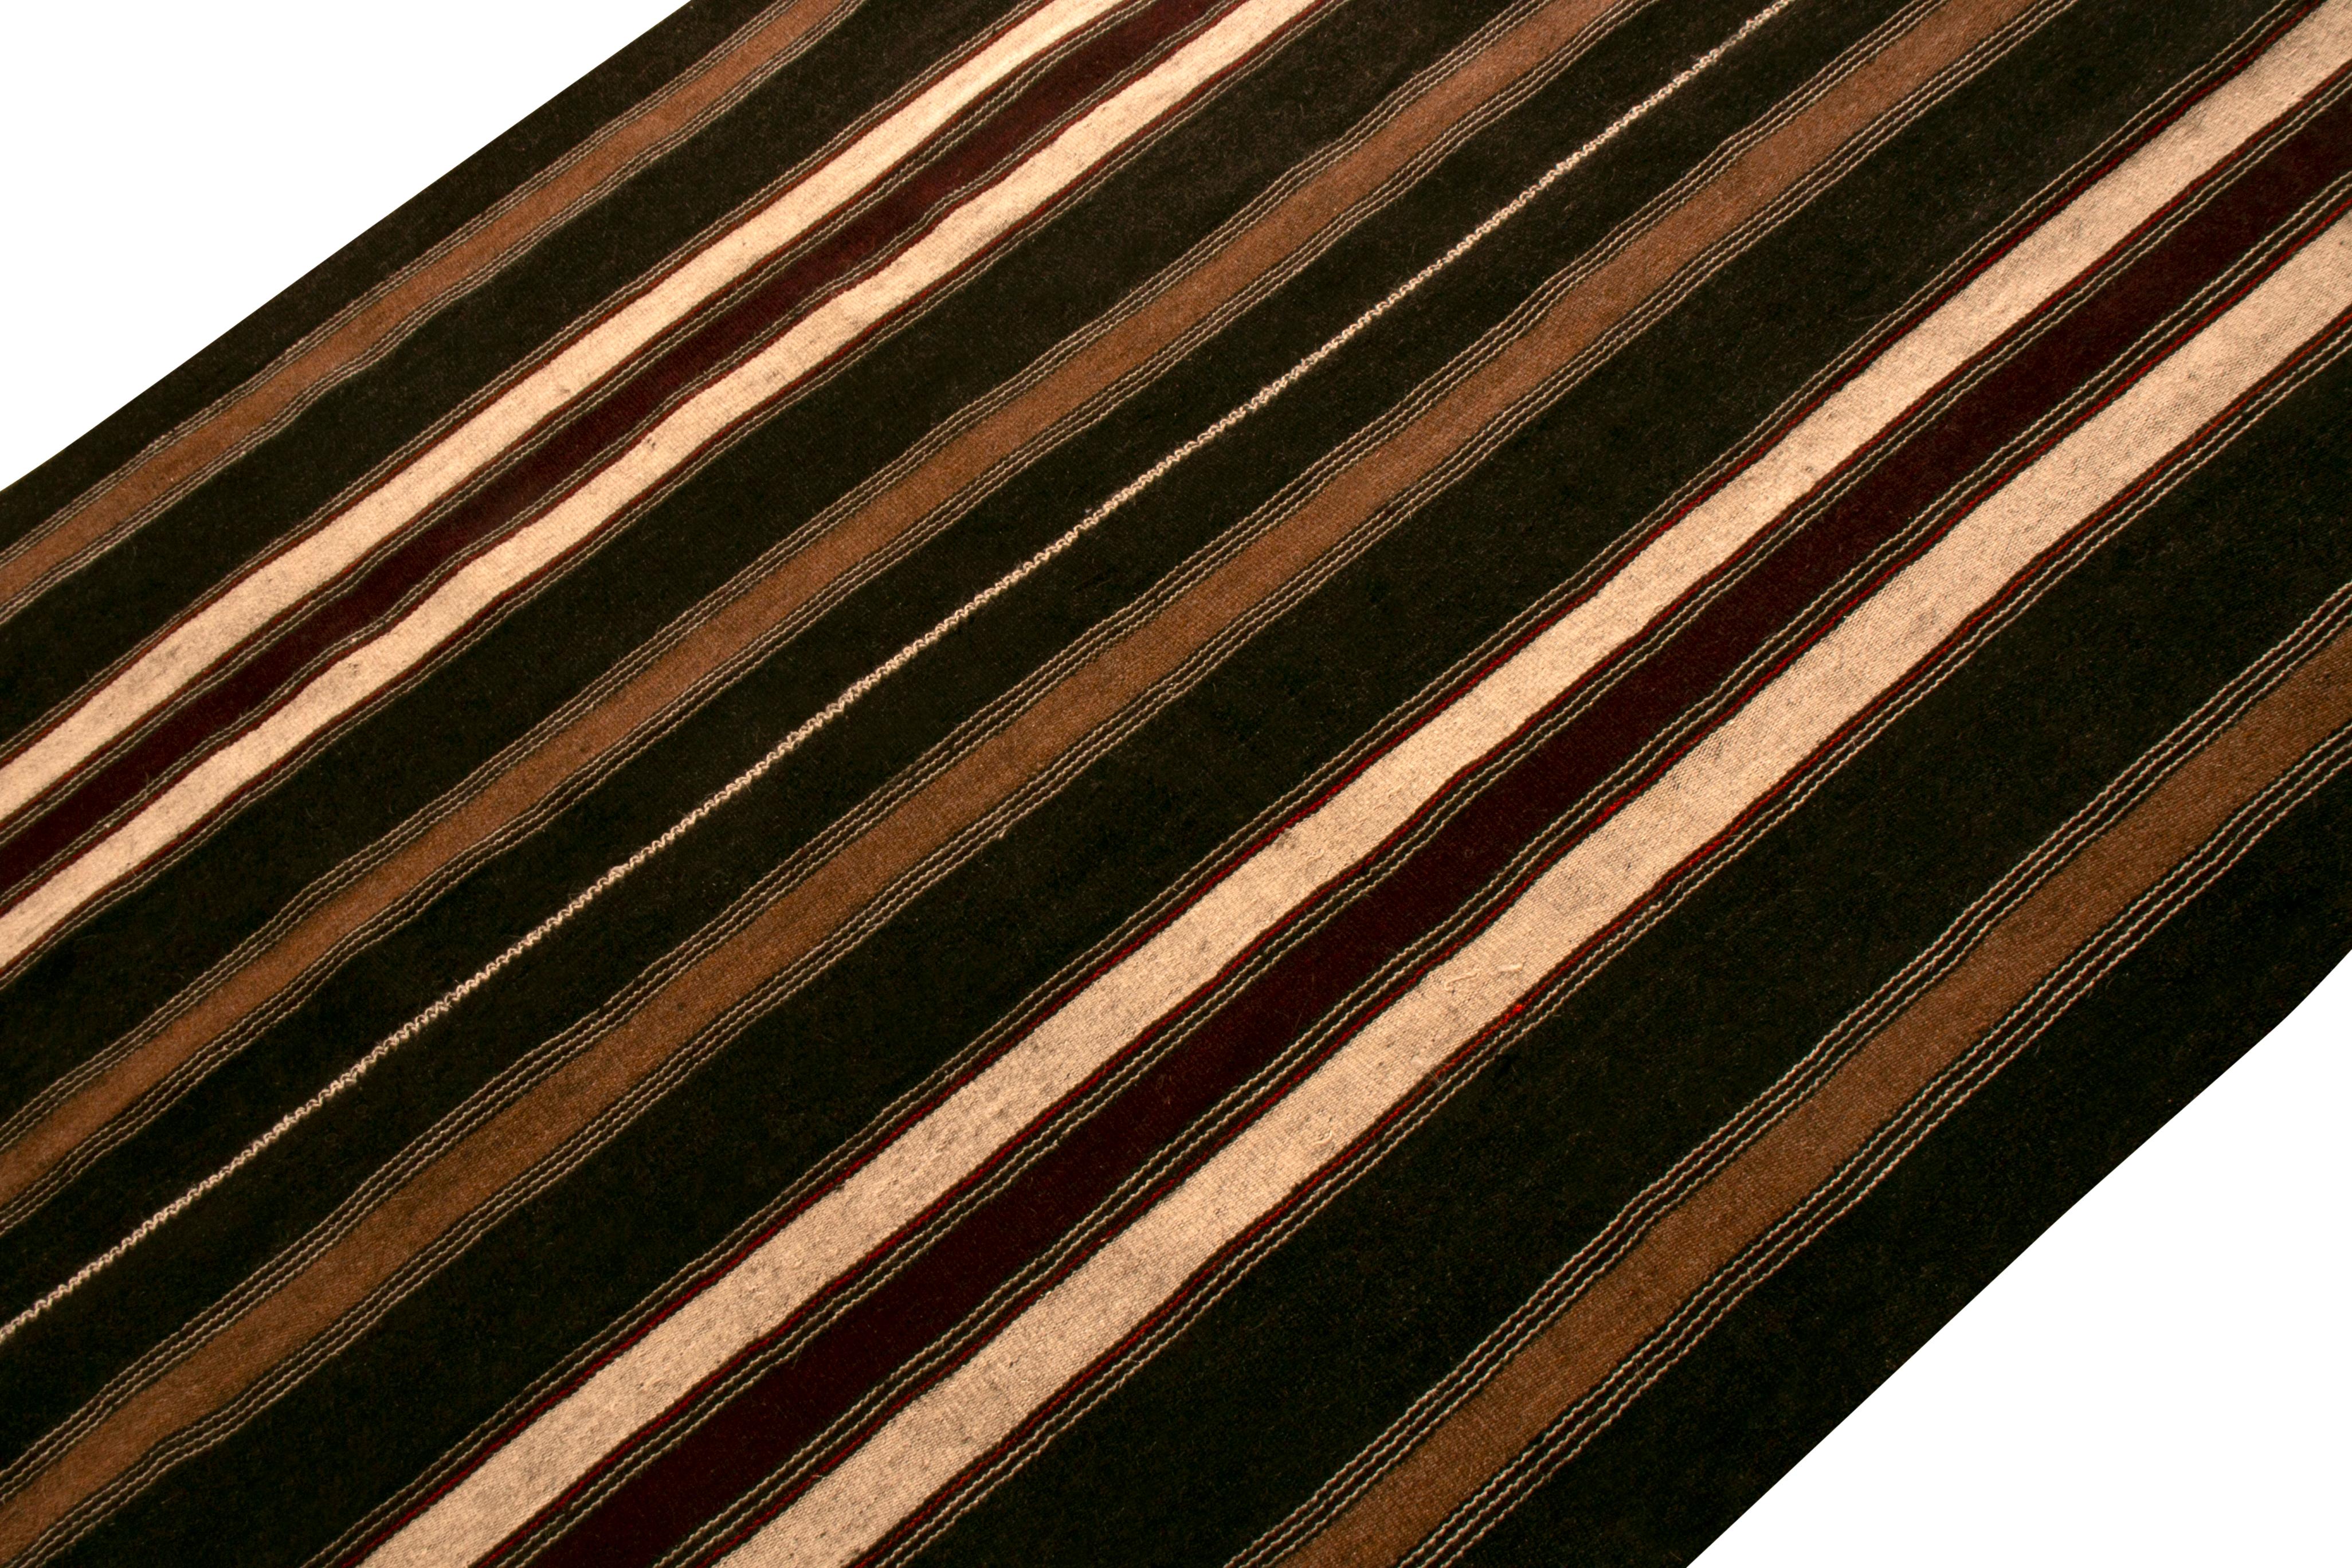 Hand-Woven 1950s Midcentury Persian Kilim Black and Beige-Brown Striped Vintage Flat-Weave